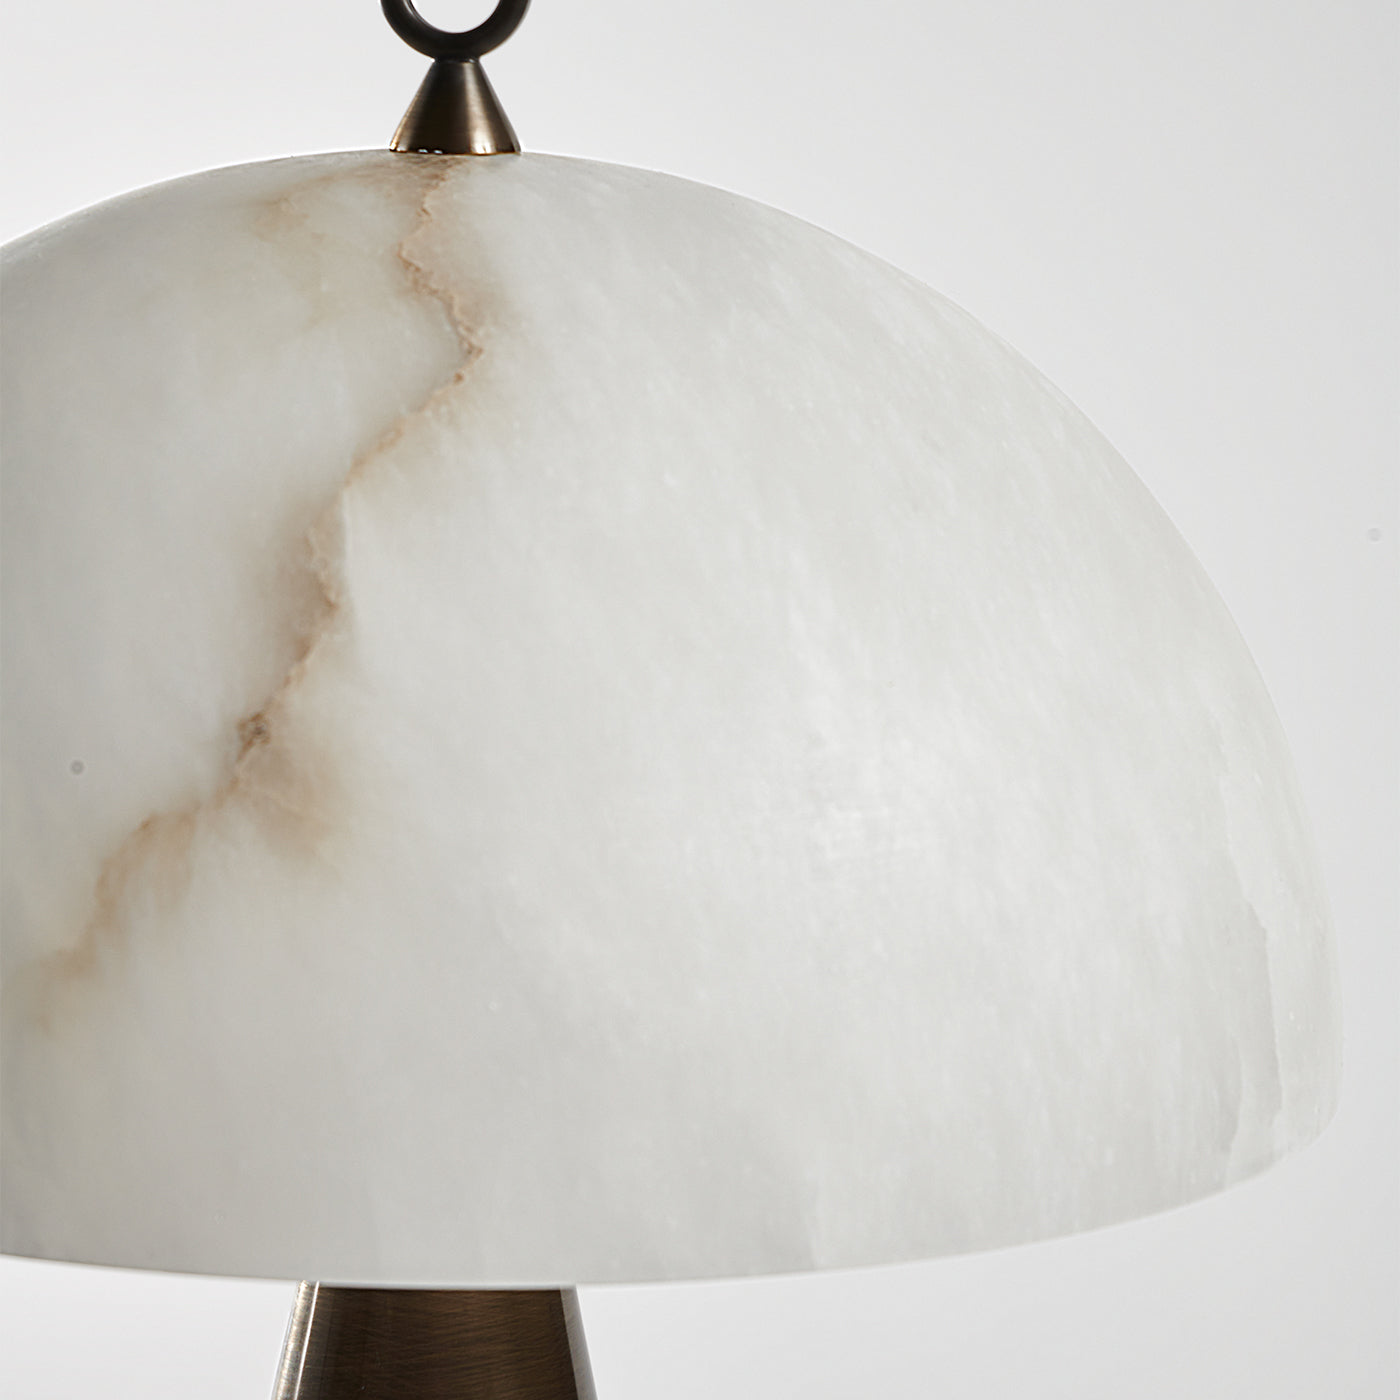 Funghetto Brushed Bronze and Alabaster Table Lamp - Alternative view 2